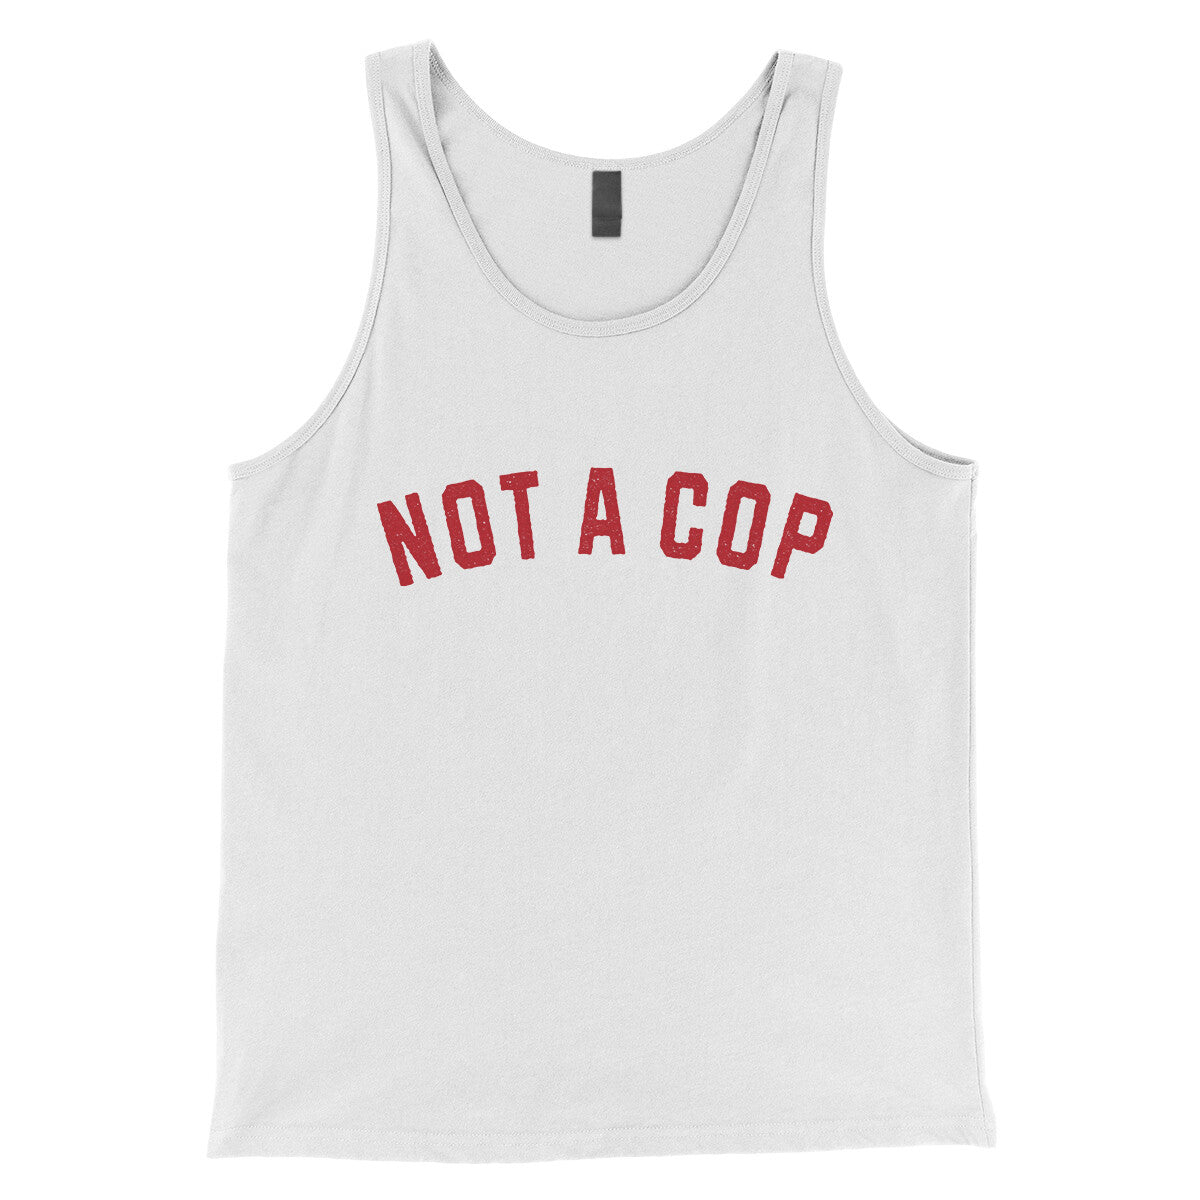 Not a Cop in White Color